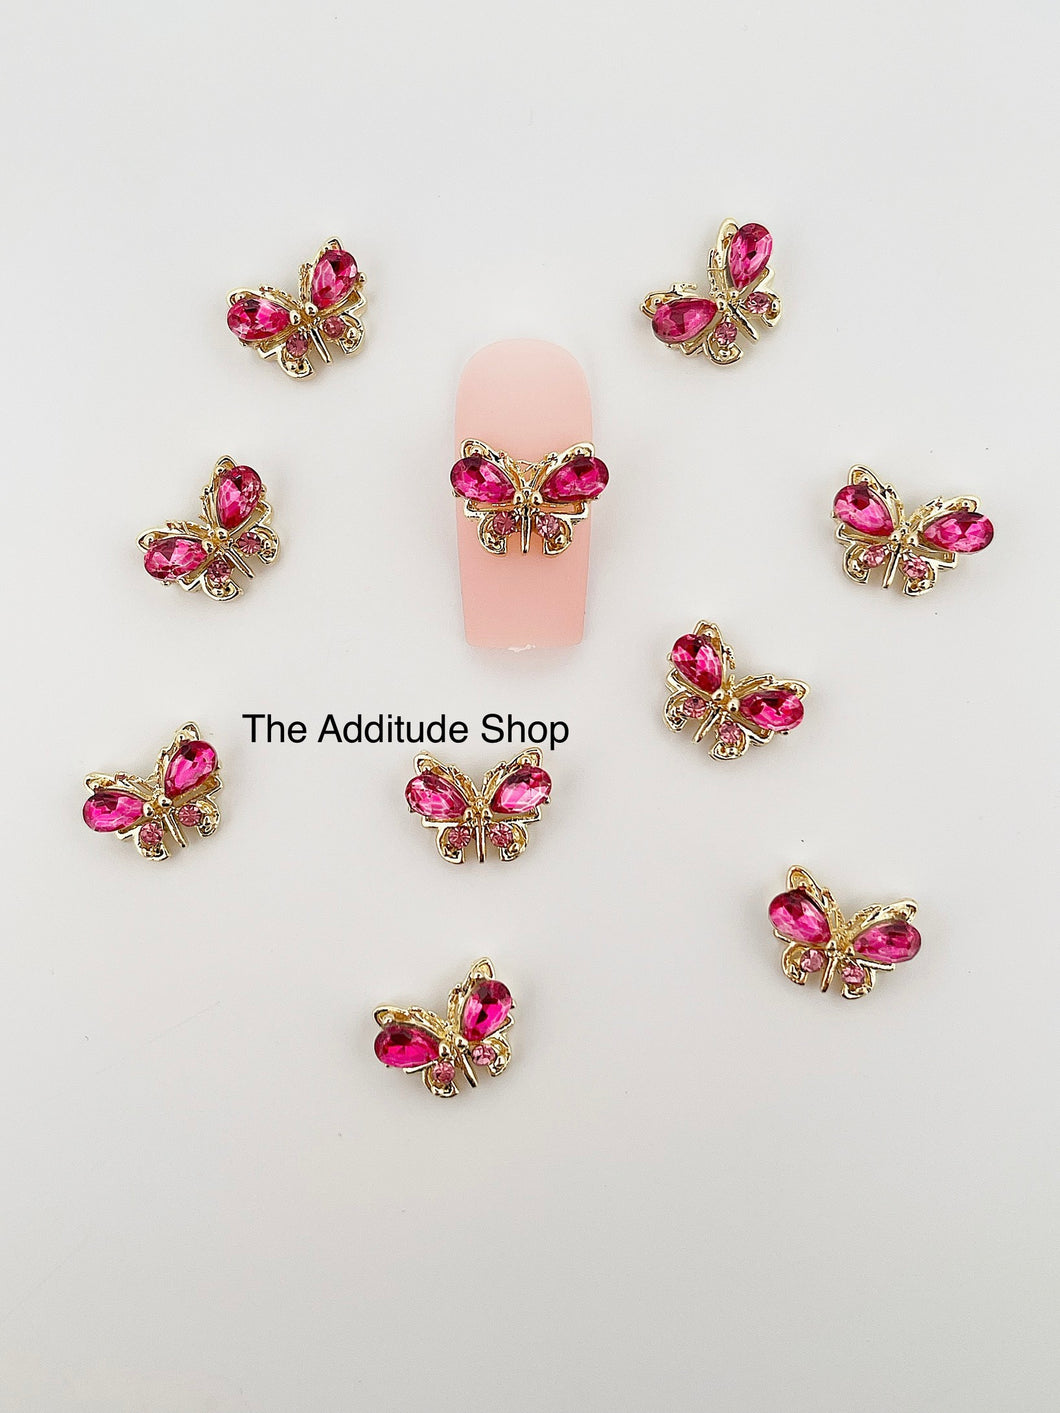 10 Pieces Dark Pink Rhinestone Butterfly Nail 3D Charms